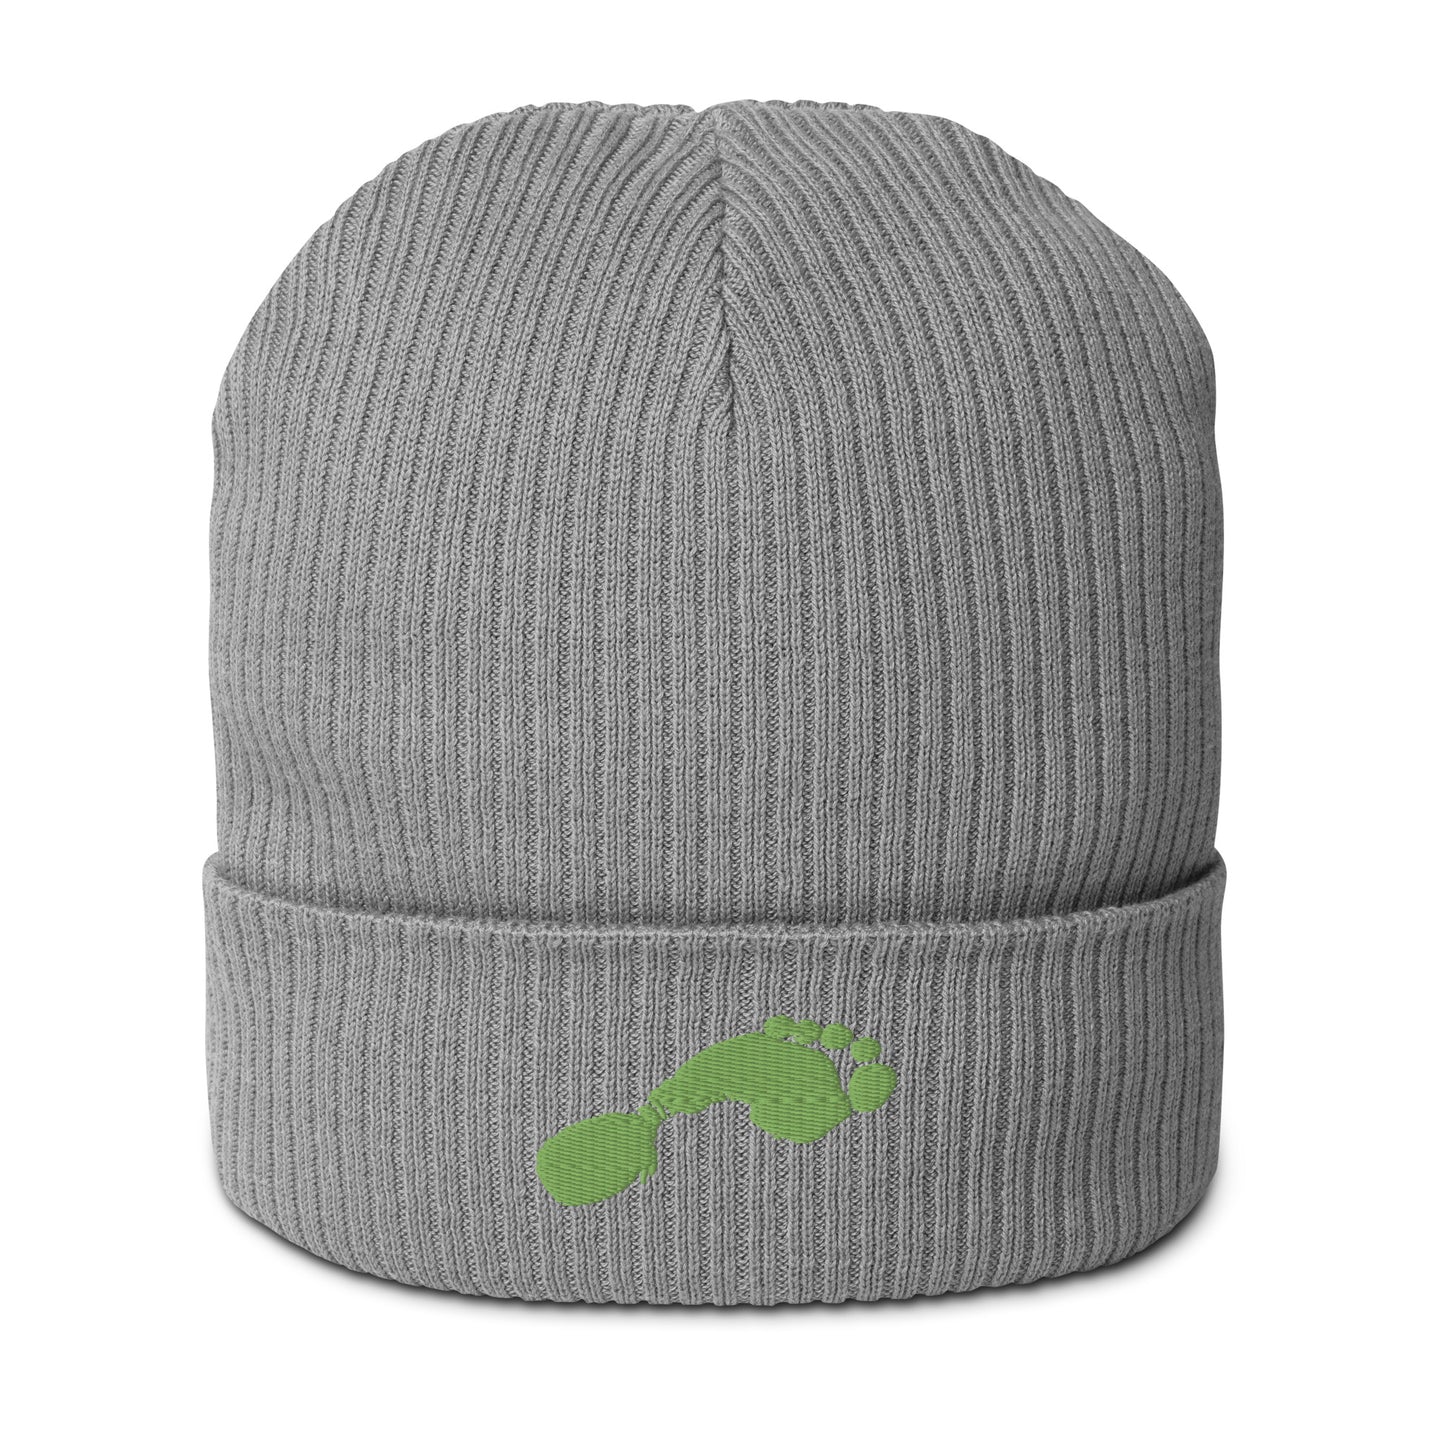 The Eco-FOOT Beanie